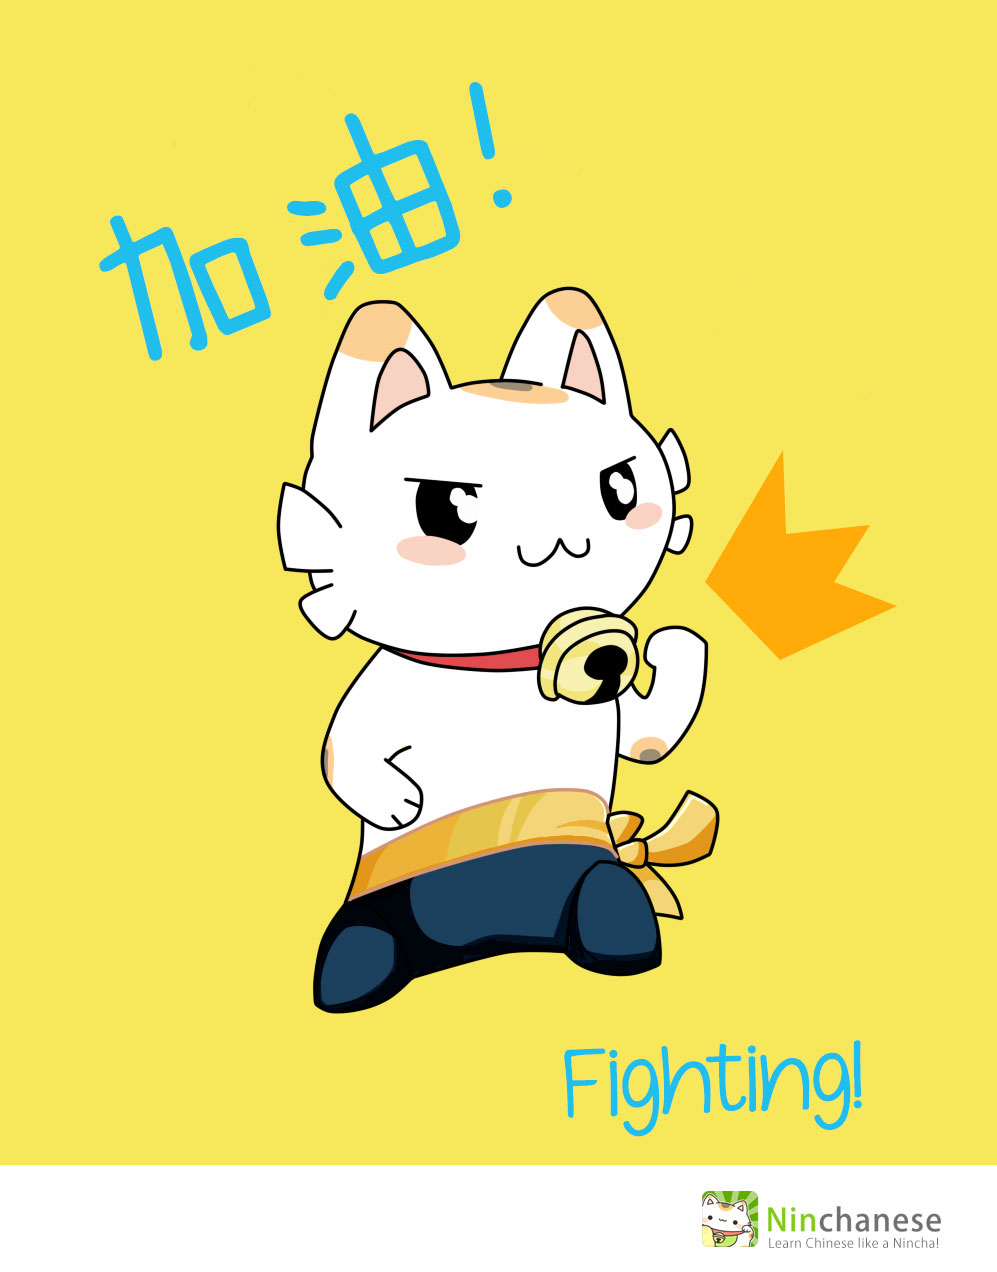 Our motivational Nincha is here to tell you you can do it!